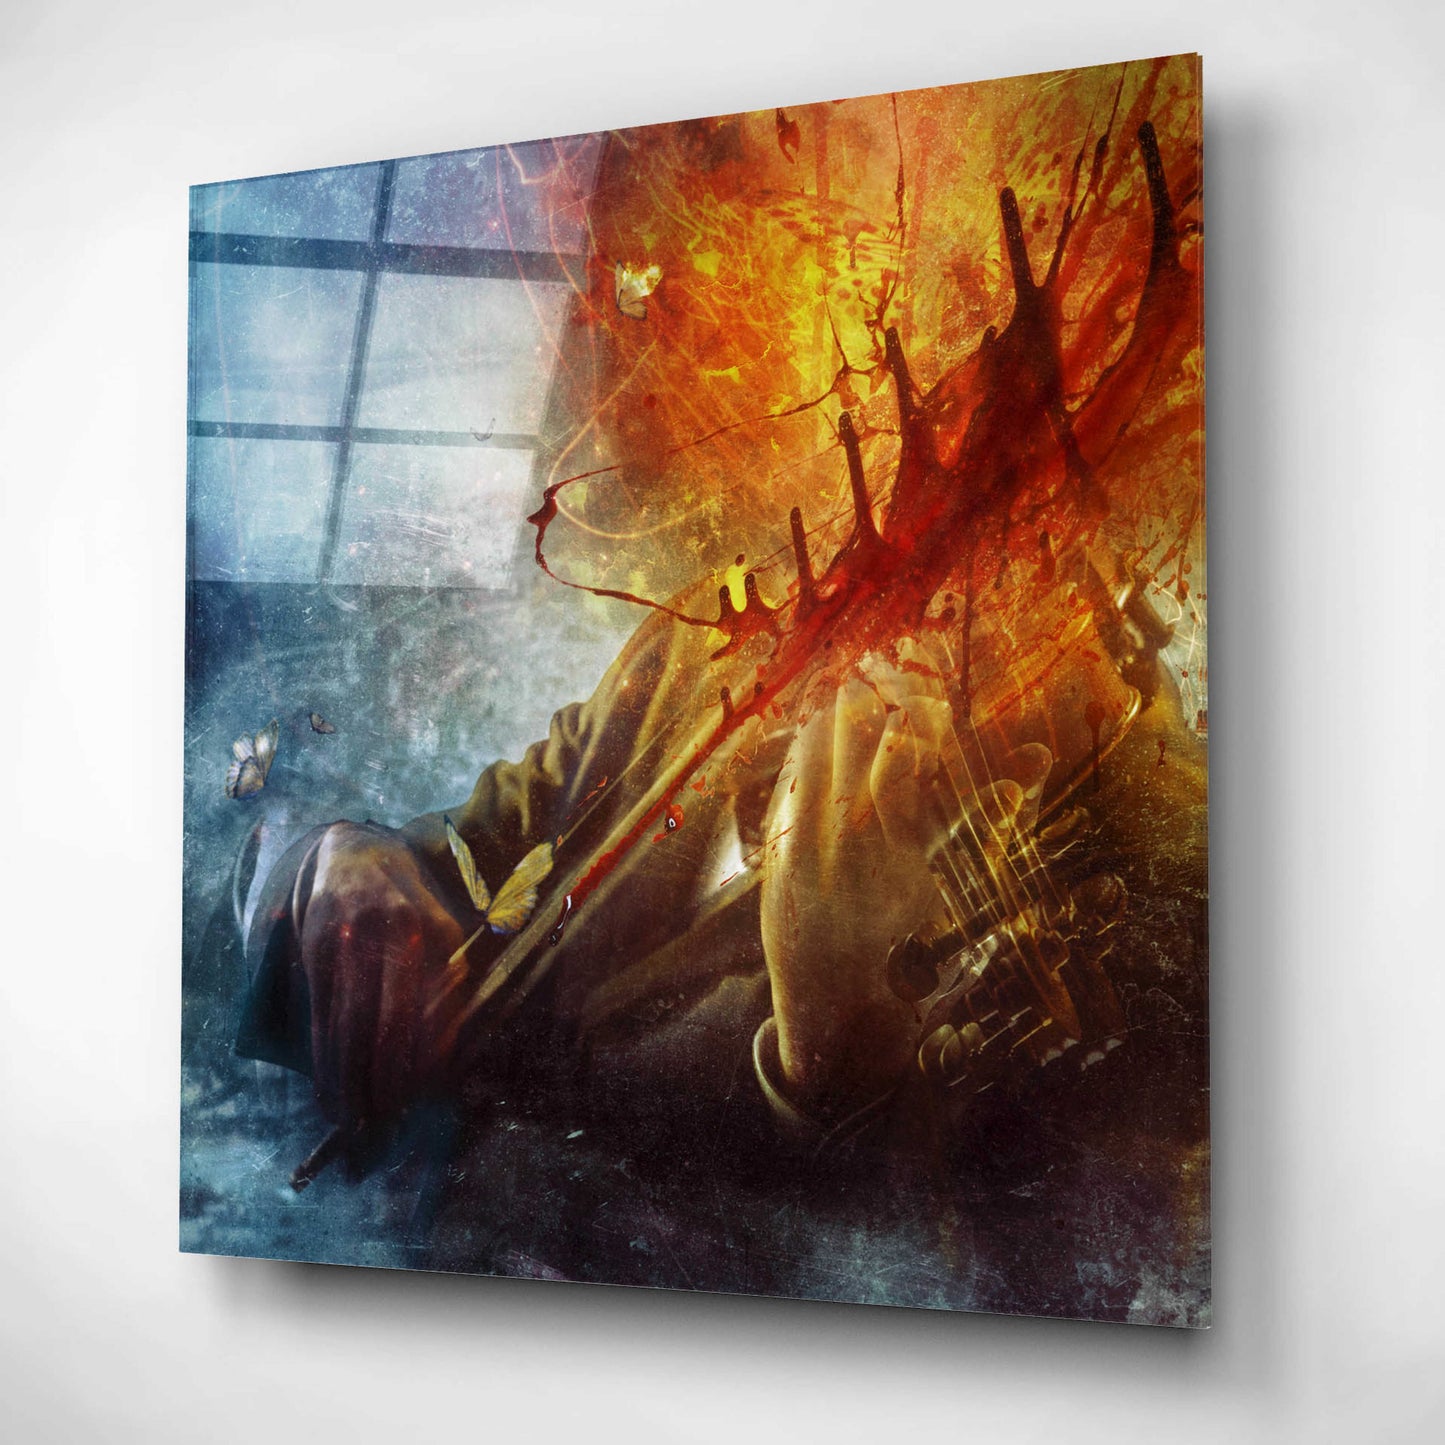 Epic Art 'A Look Into The Abyss' by Mario Sanchez Nevado, Acrylic Glass Wall Art,12x12